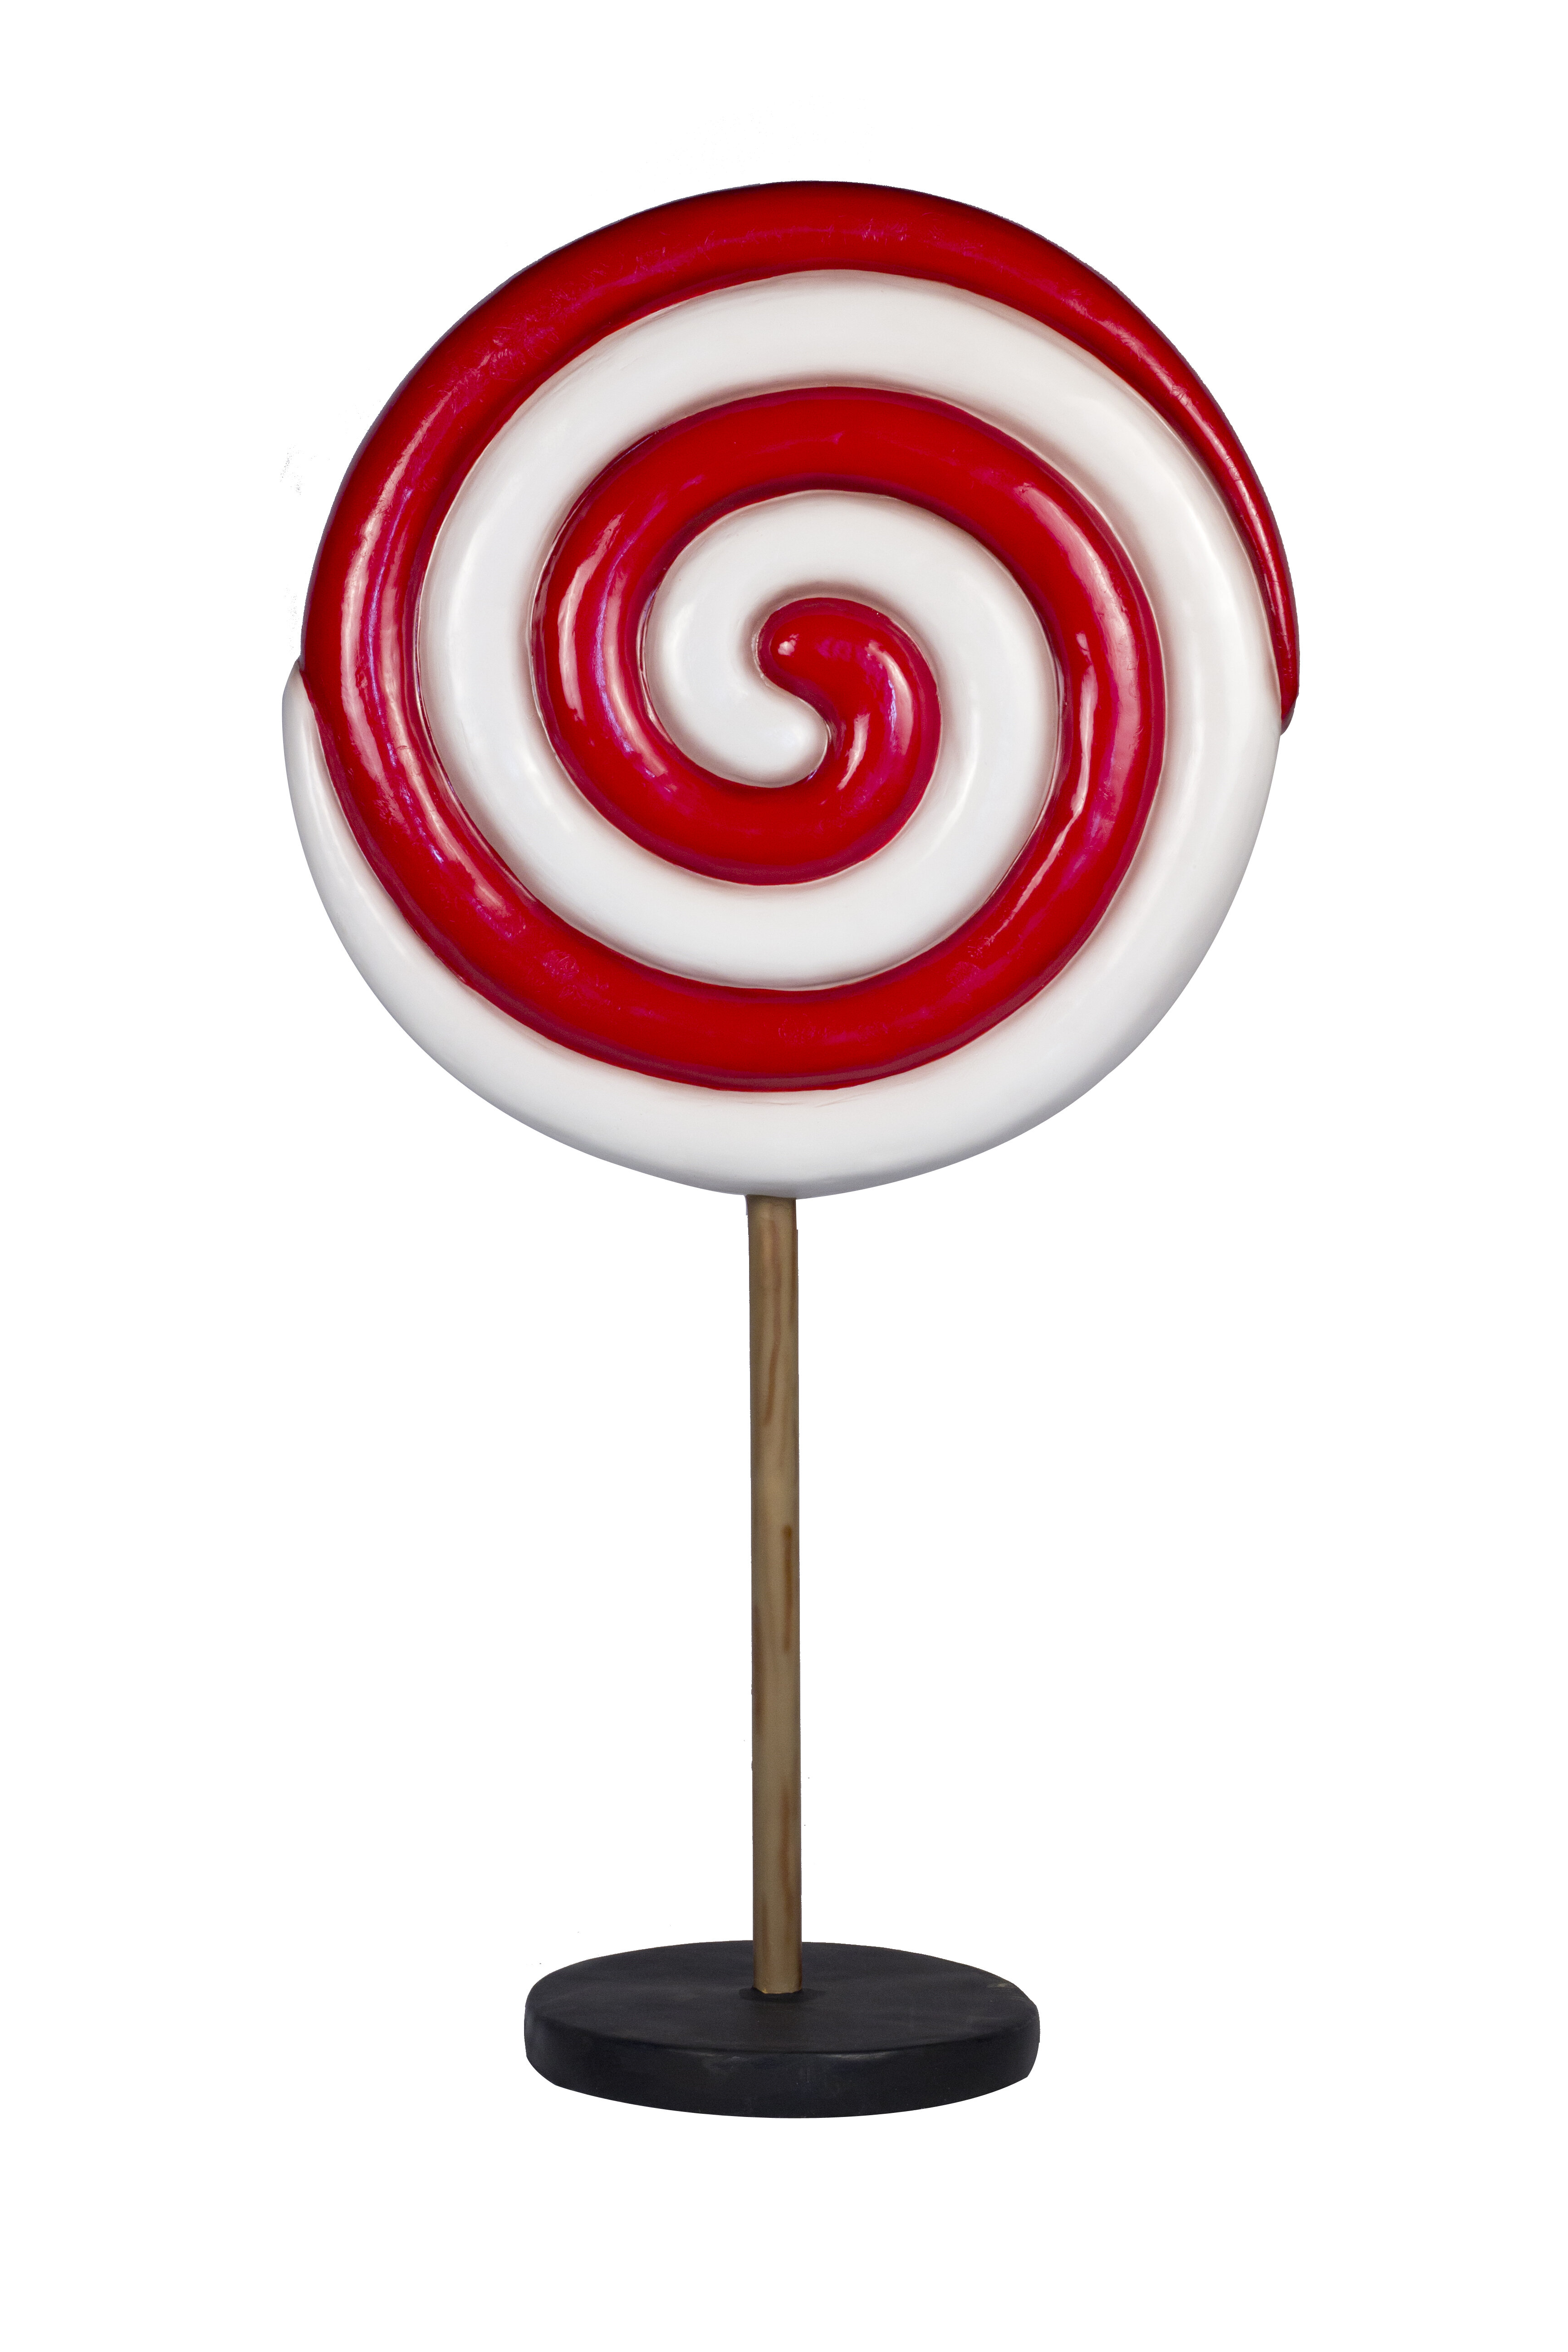 Peppermint Swirl Light Switch Plate Cover Candy sweet lollipop confectionery